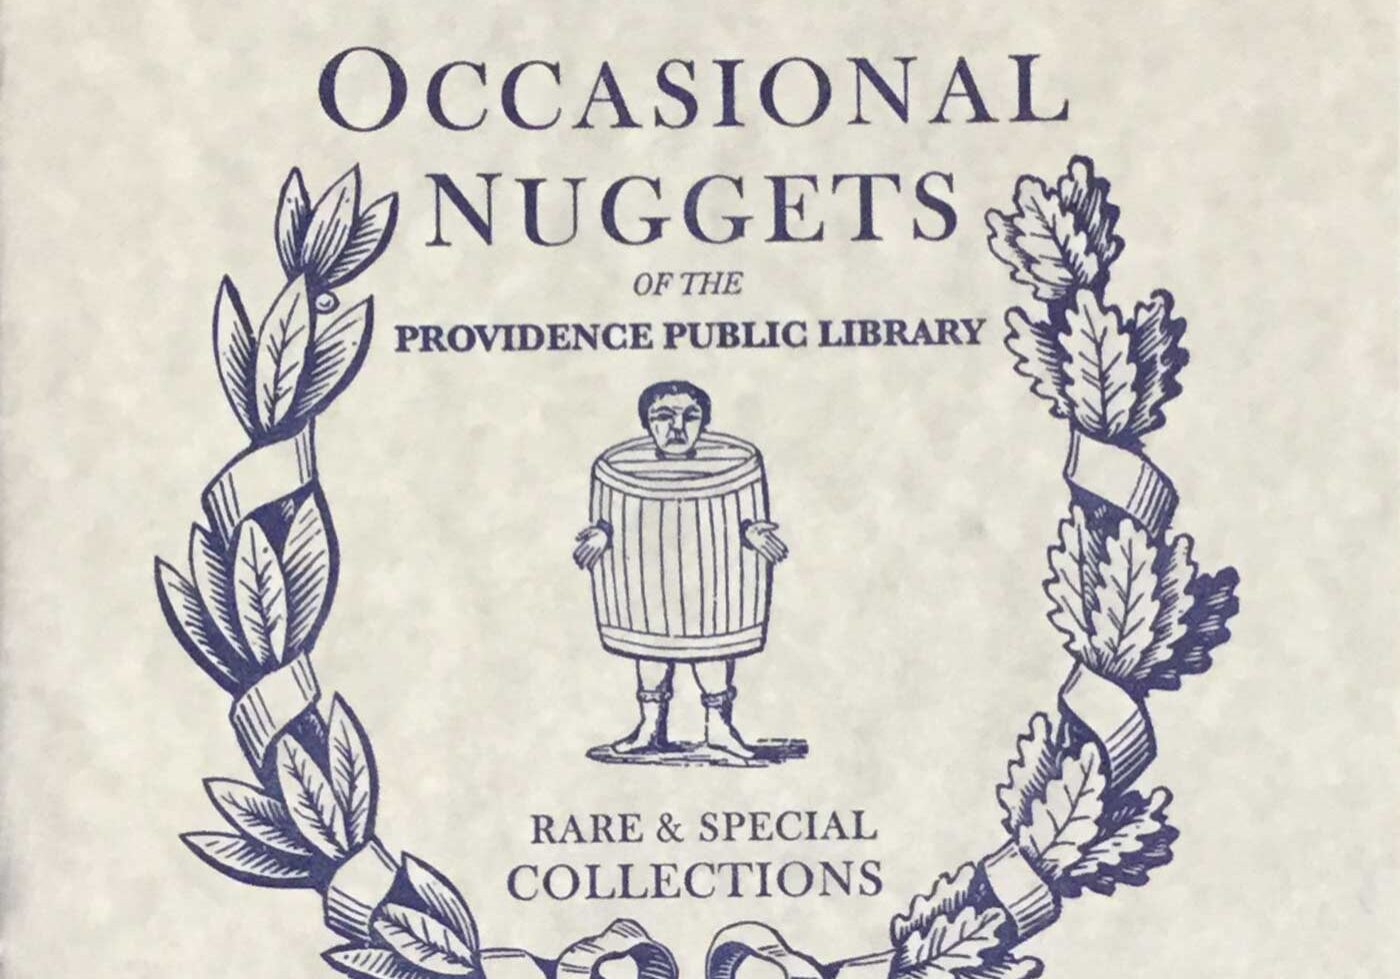 The cover of "Occasional Nuggets", a publication produced by PPL Special Collections. This issue was prepared by Creative Fellow Micah Salking.